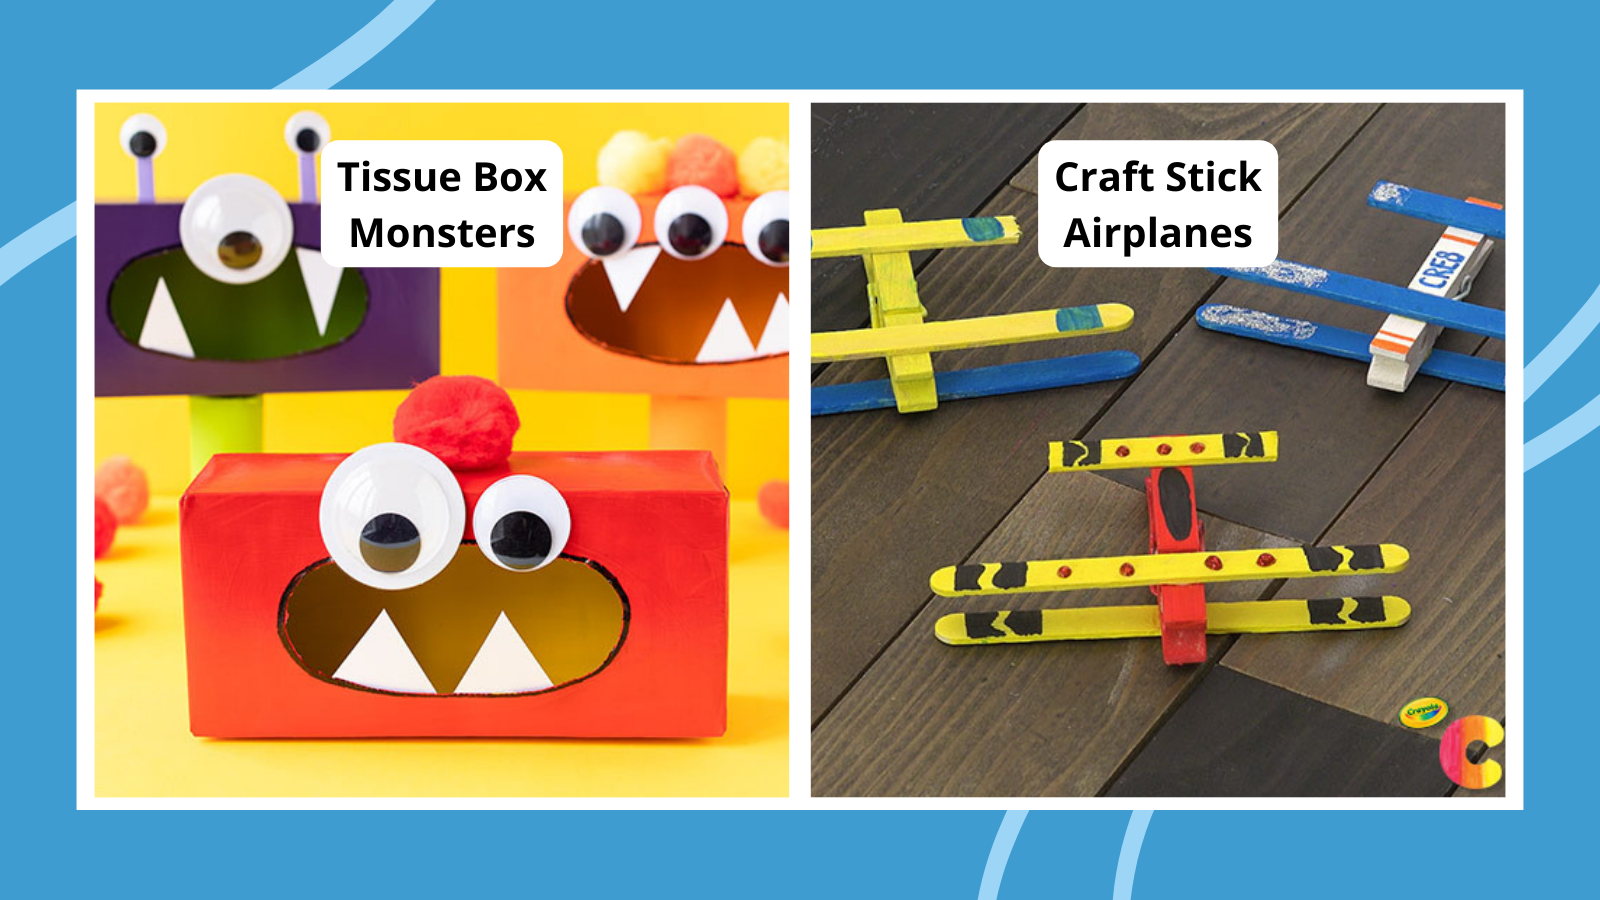 Examples of easy crafts for kids including tissue box monsters and craft stick airplanes.